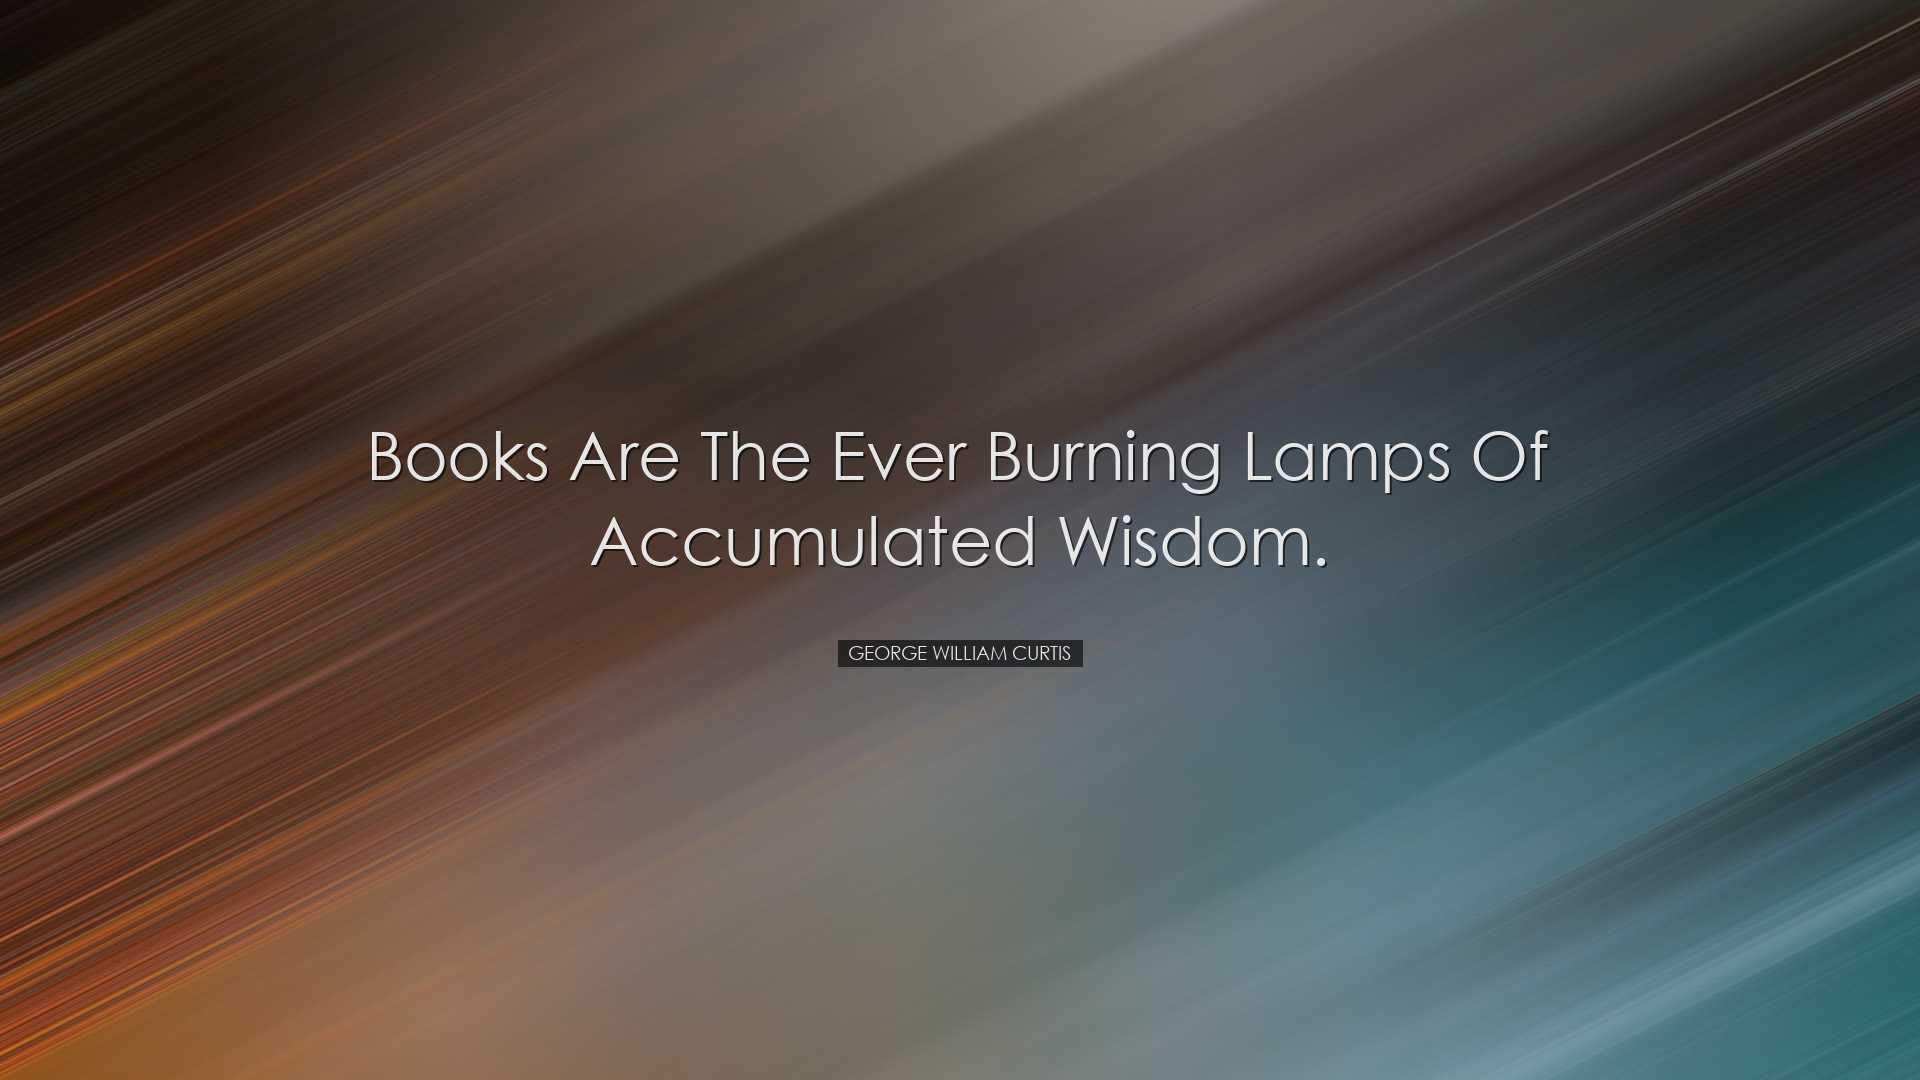 Books are the ever burning lamps of accumulated wisdom. - George W